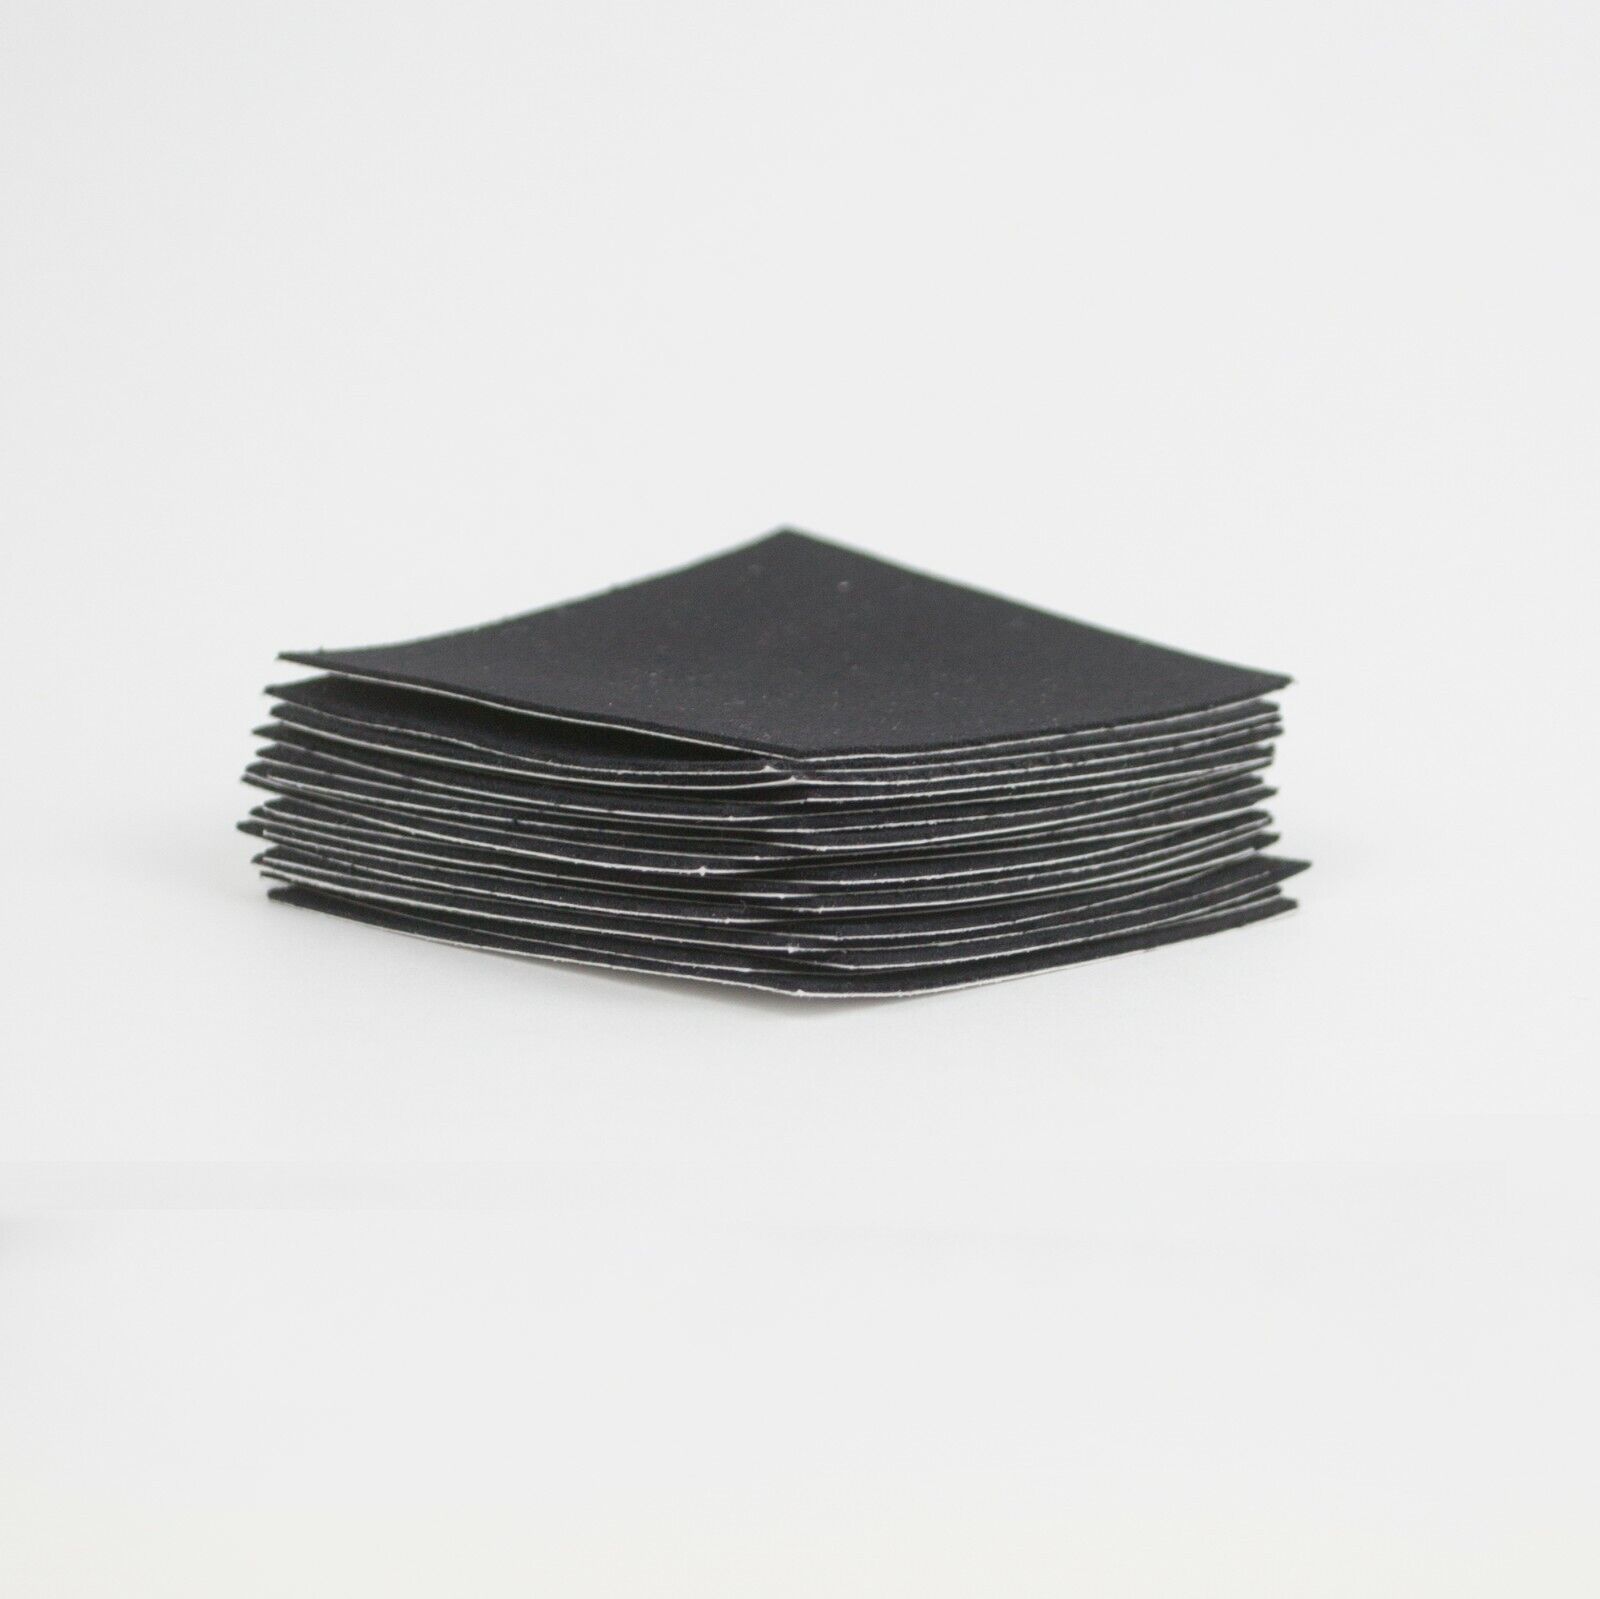 Peel And Stick Fabric Patch 10 Pack 2.5" X 2.5" Black